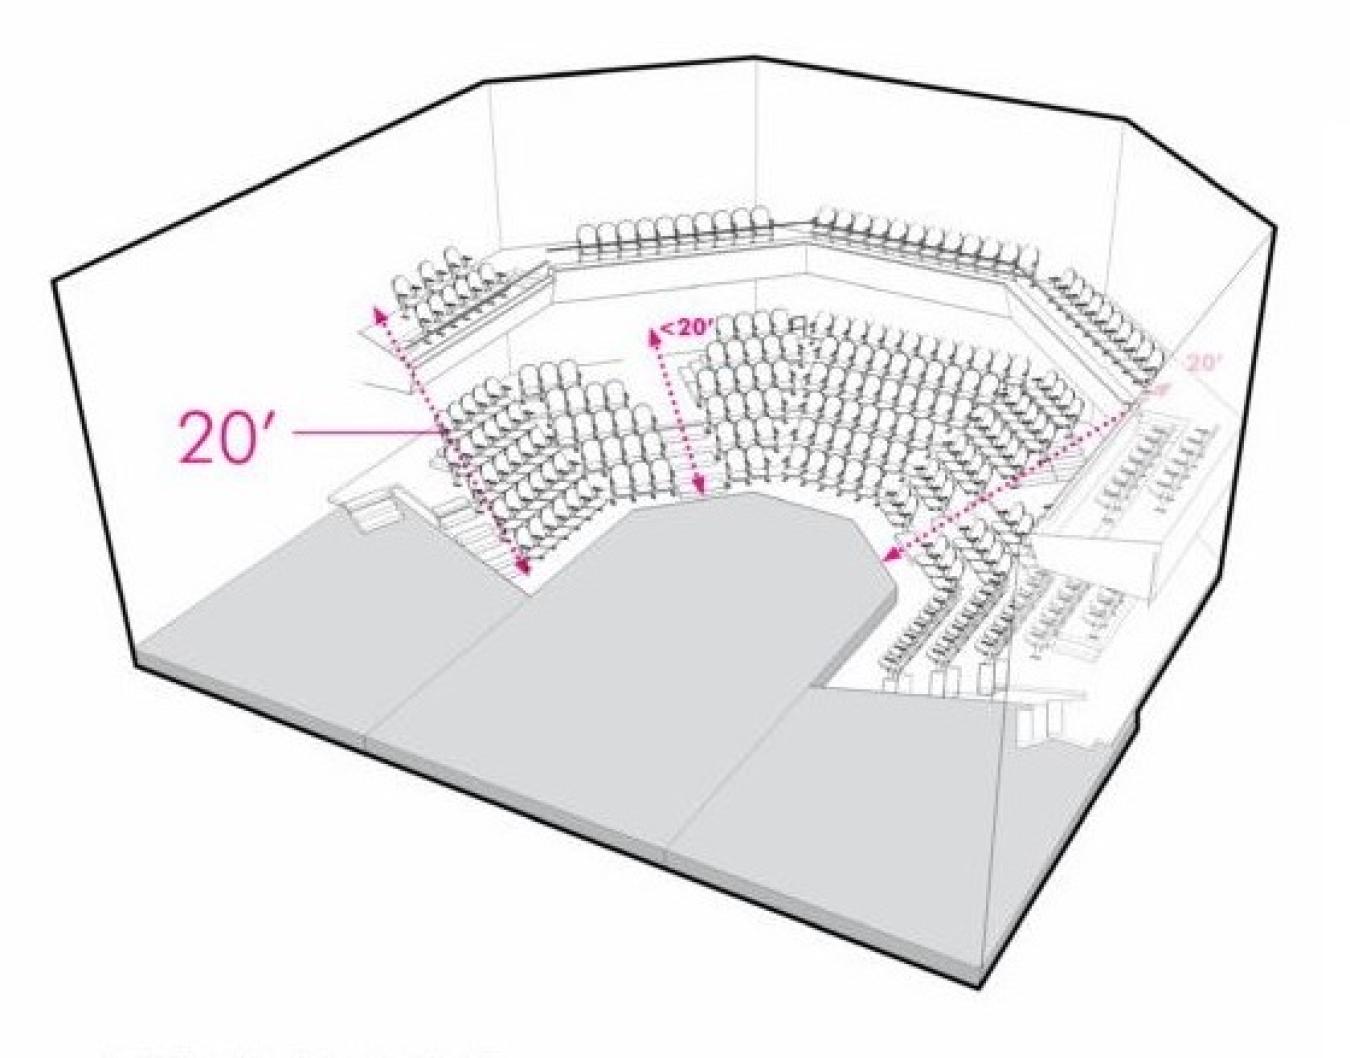 Seating Distance New Theater 1707842781